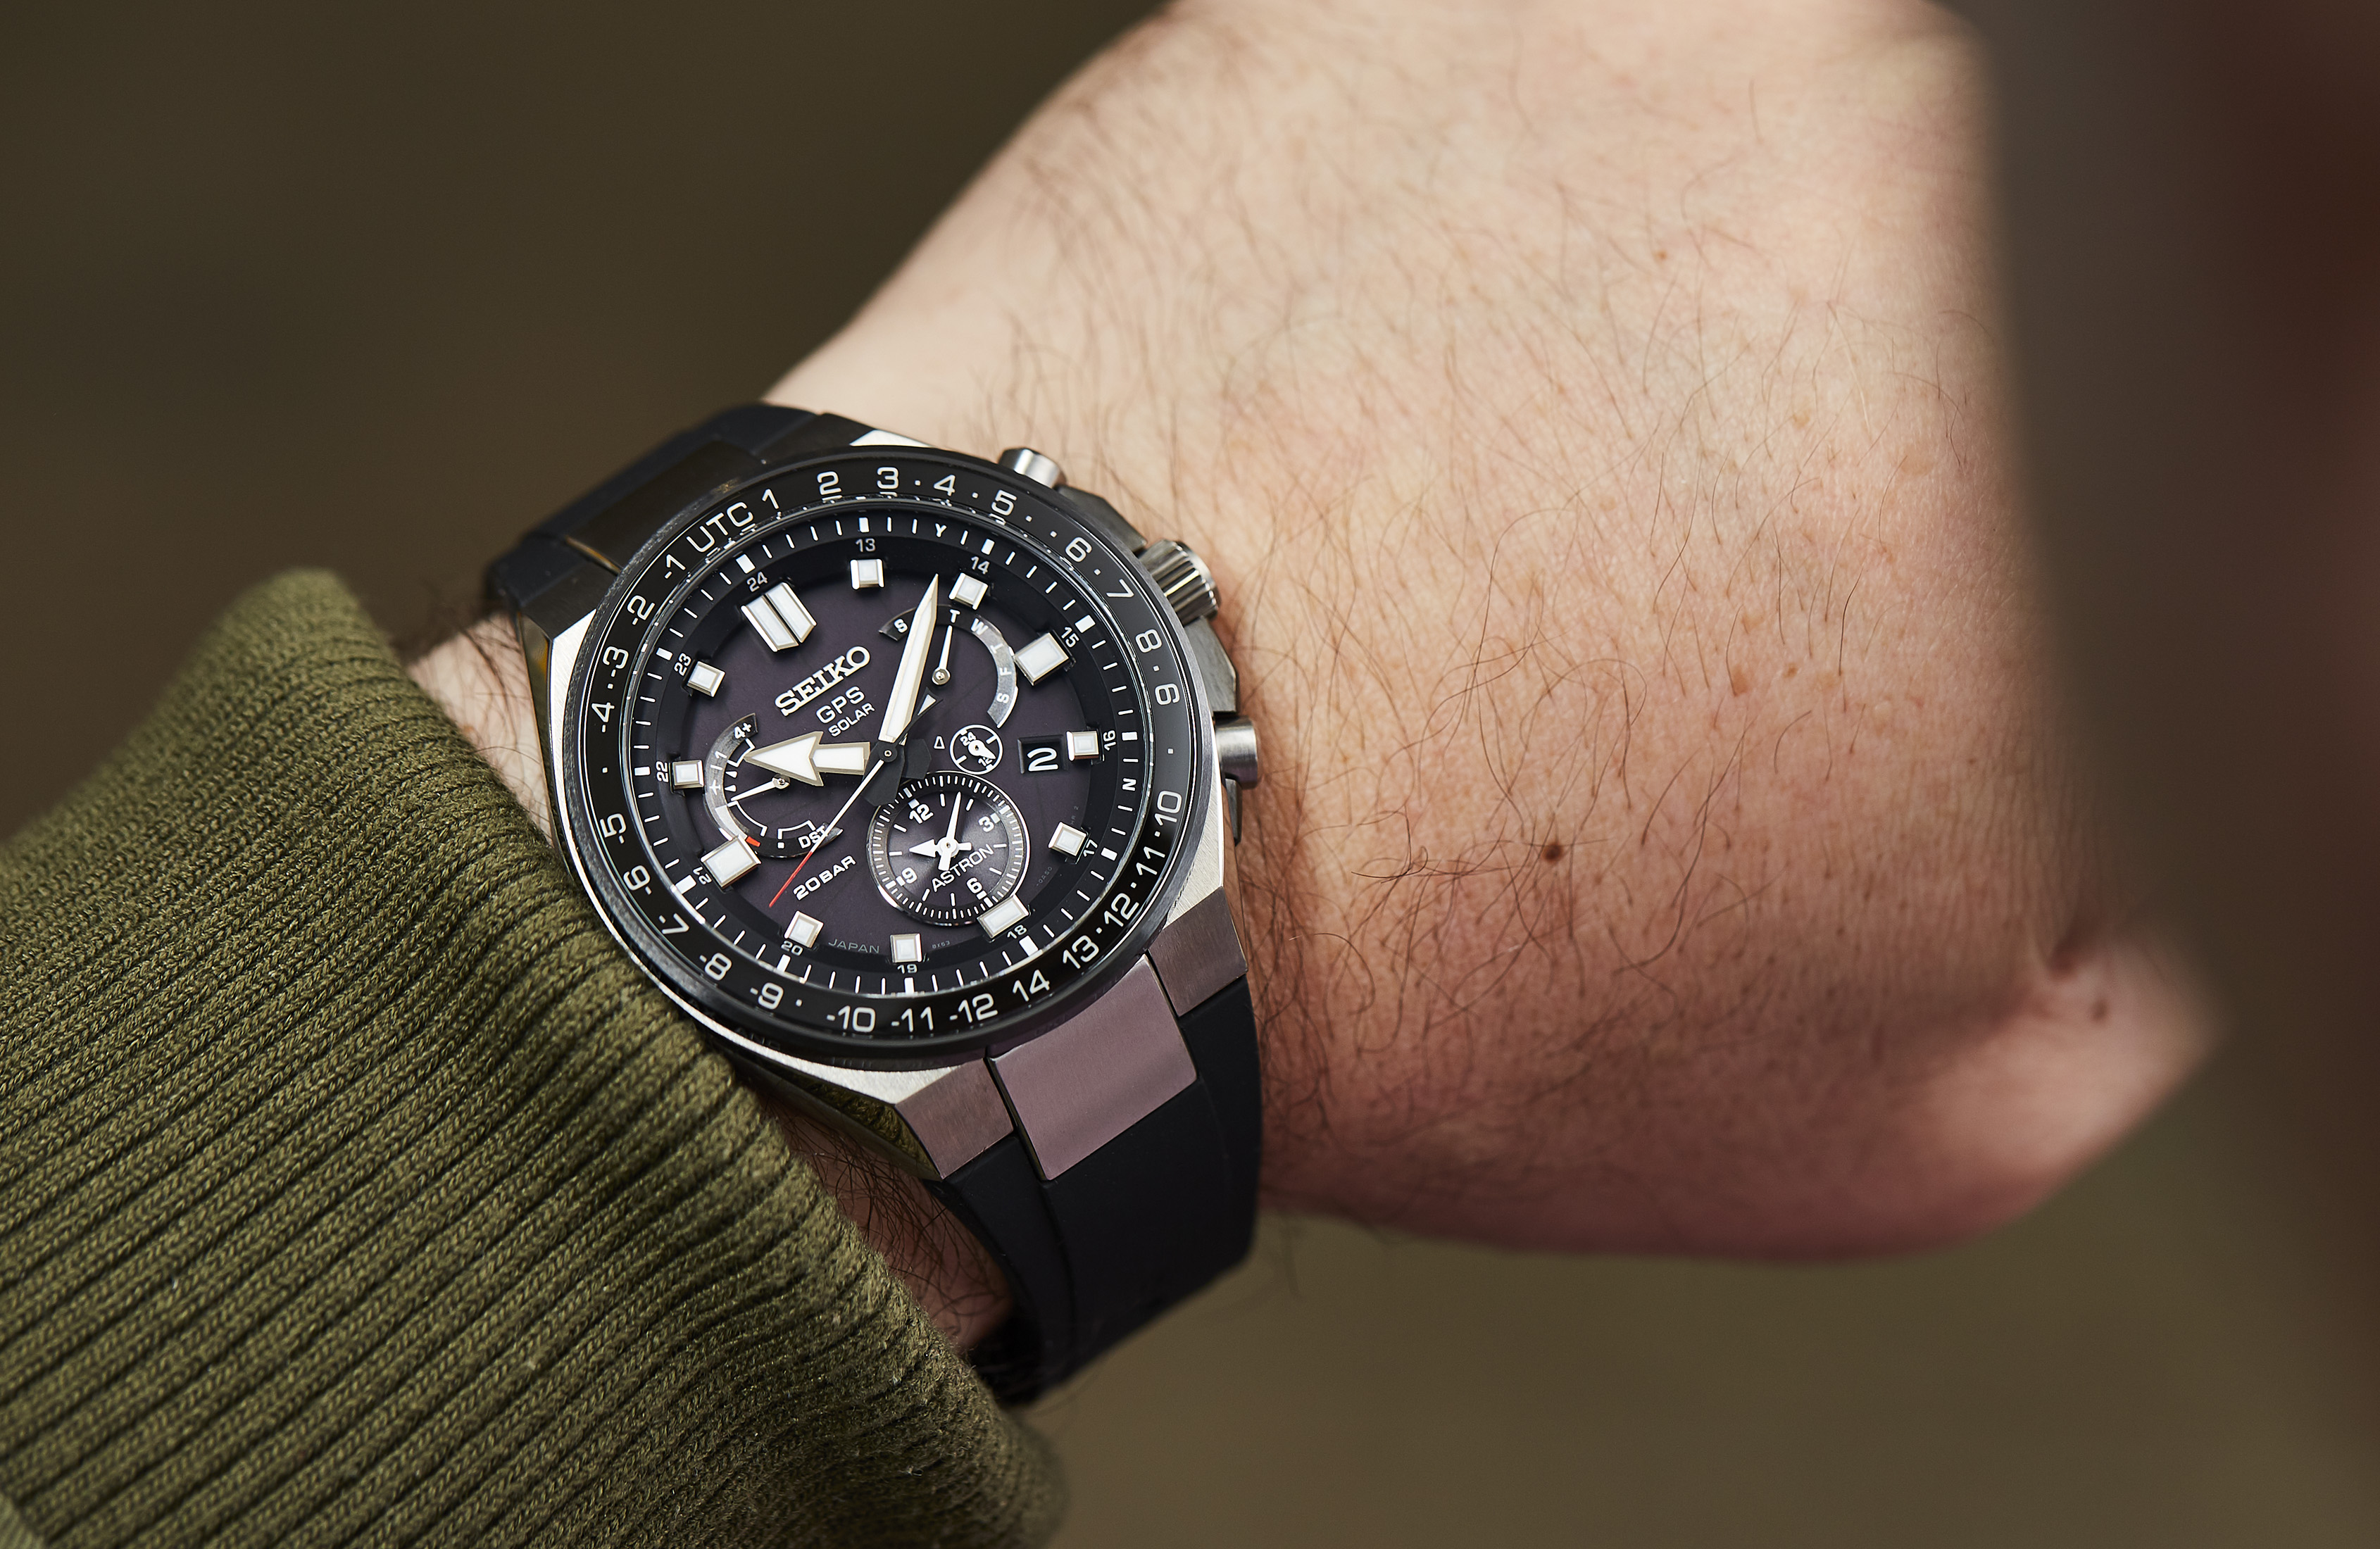 Solar flair: Which Seiko Astron watch is right for you?